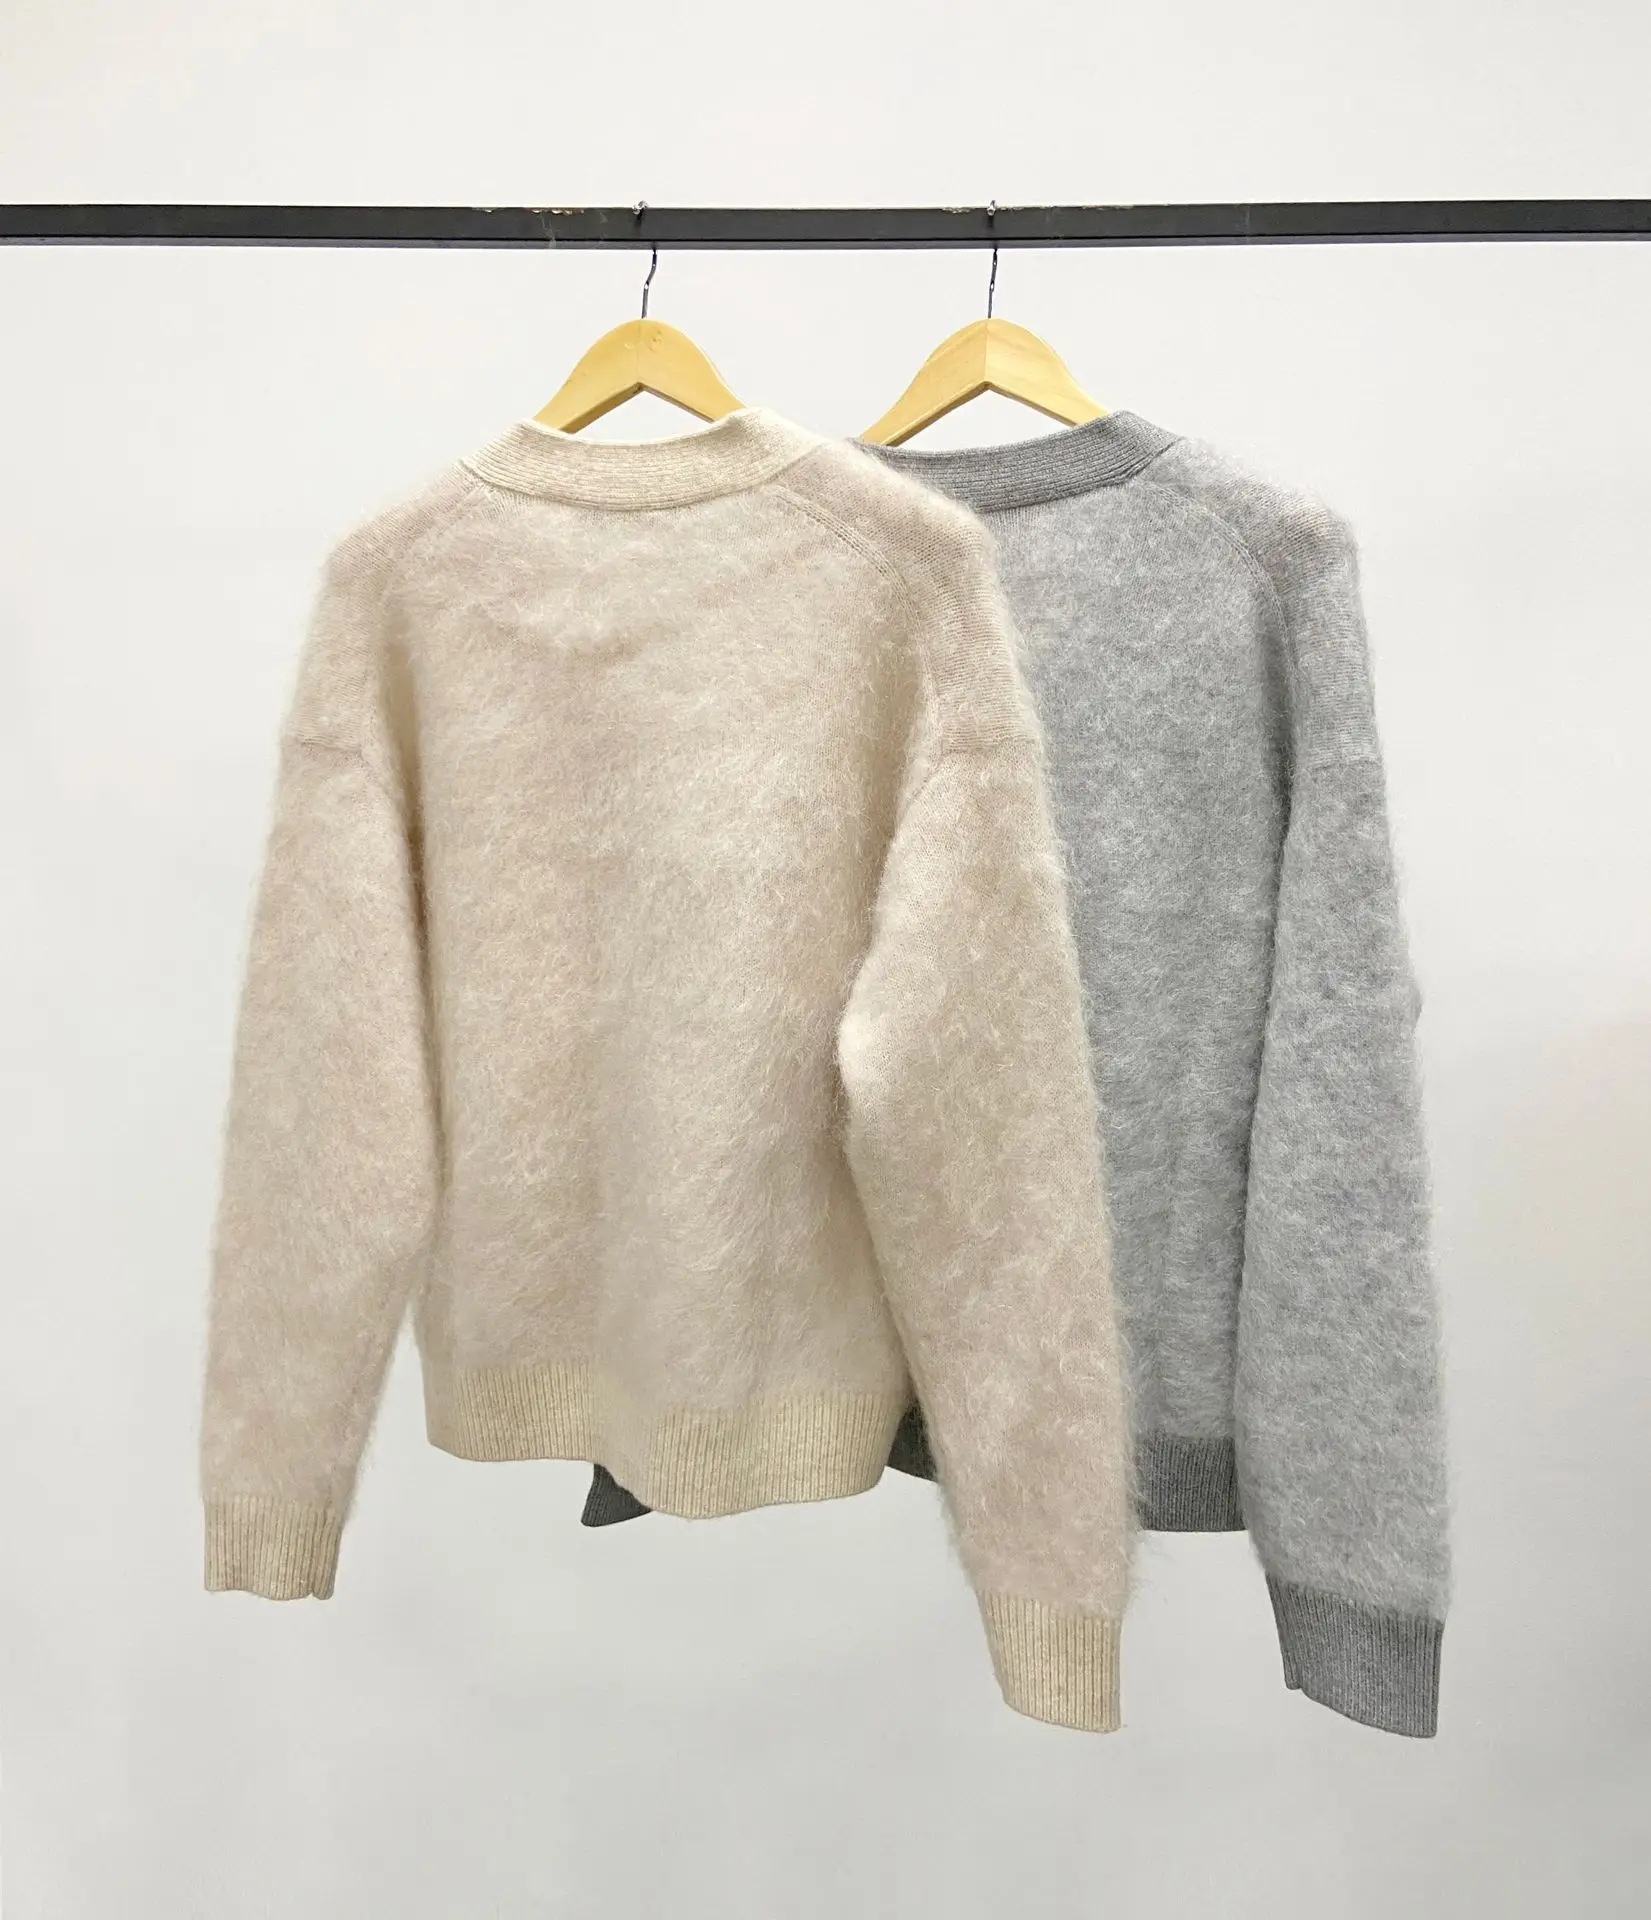 Women V-Neck Knit Cardigan Solid Color All-Match Single Breasted with Pockets 2021 Autumn Winter New Female Sweater Coats